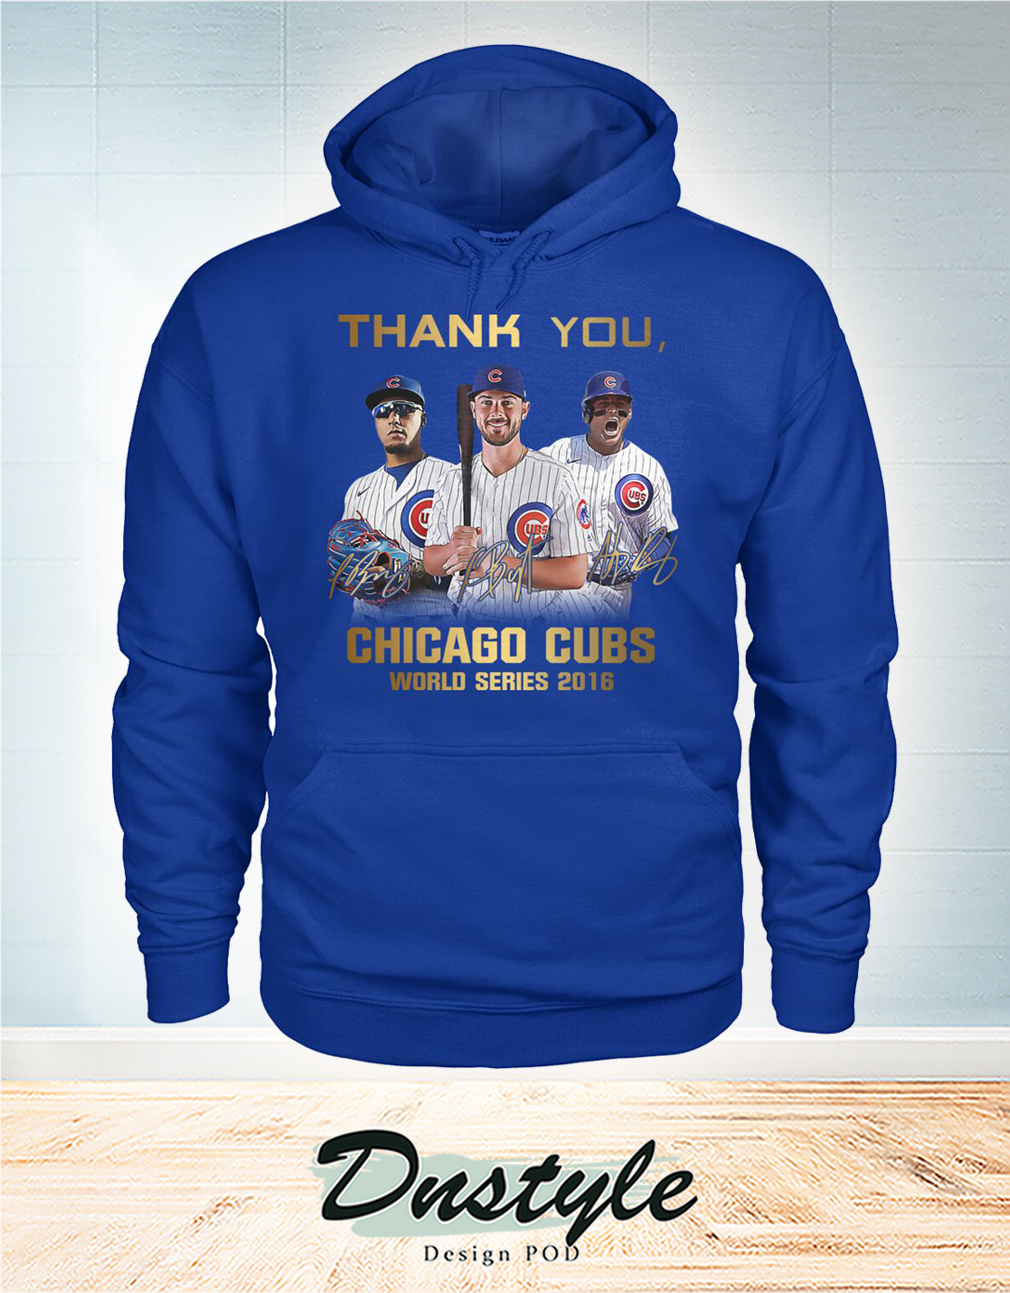 Thank you Chicago cubs world series 2016 hoodie